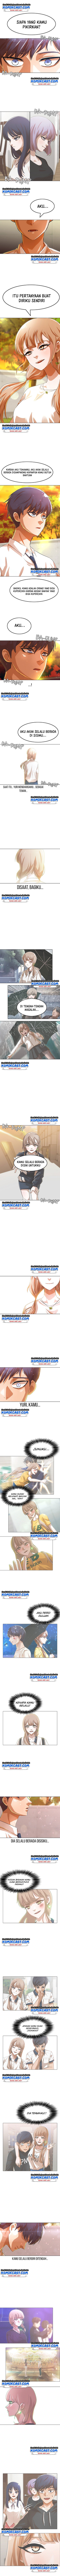 The Girl from Random Chatting! Chapter 126